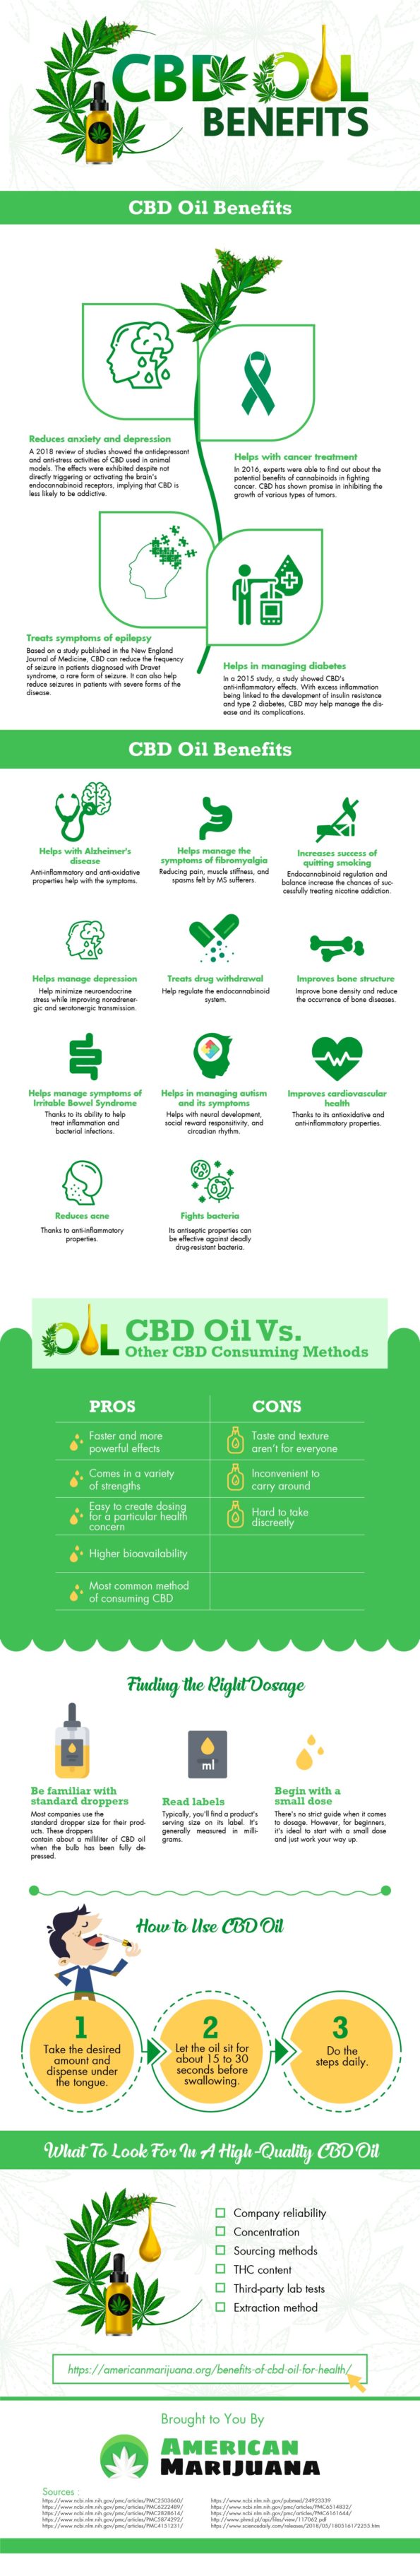 CBD Oils: Application and Benefits of Cannabis Sativa - Incredible Things